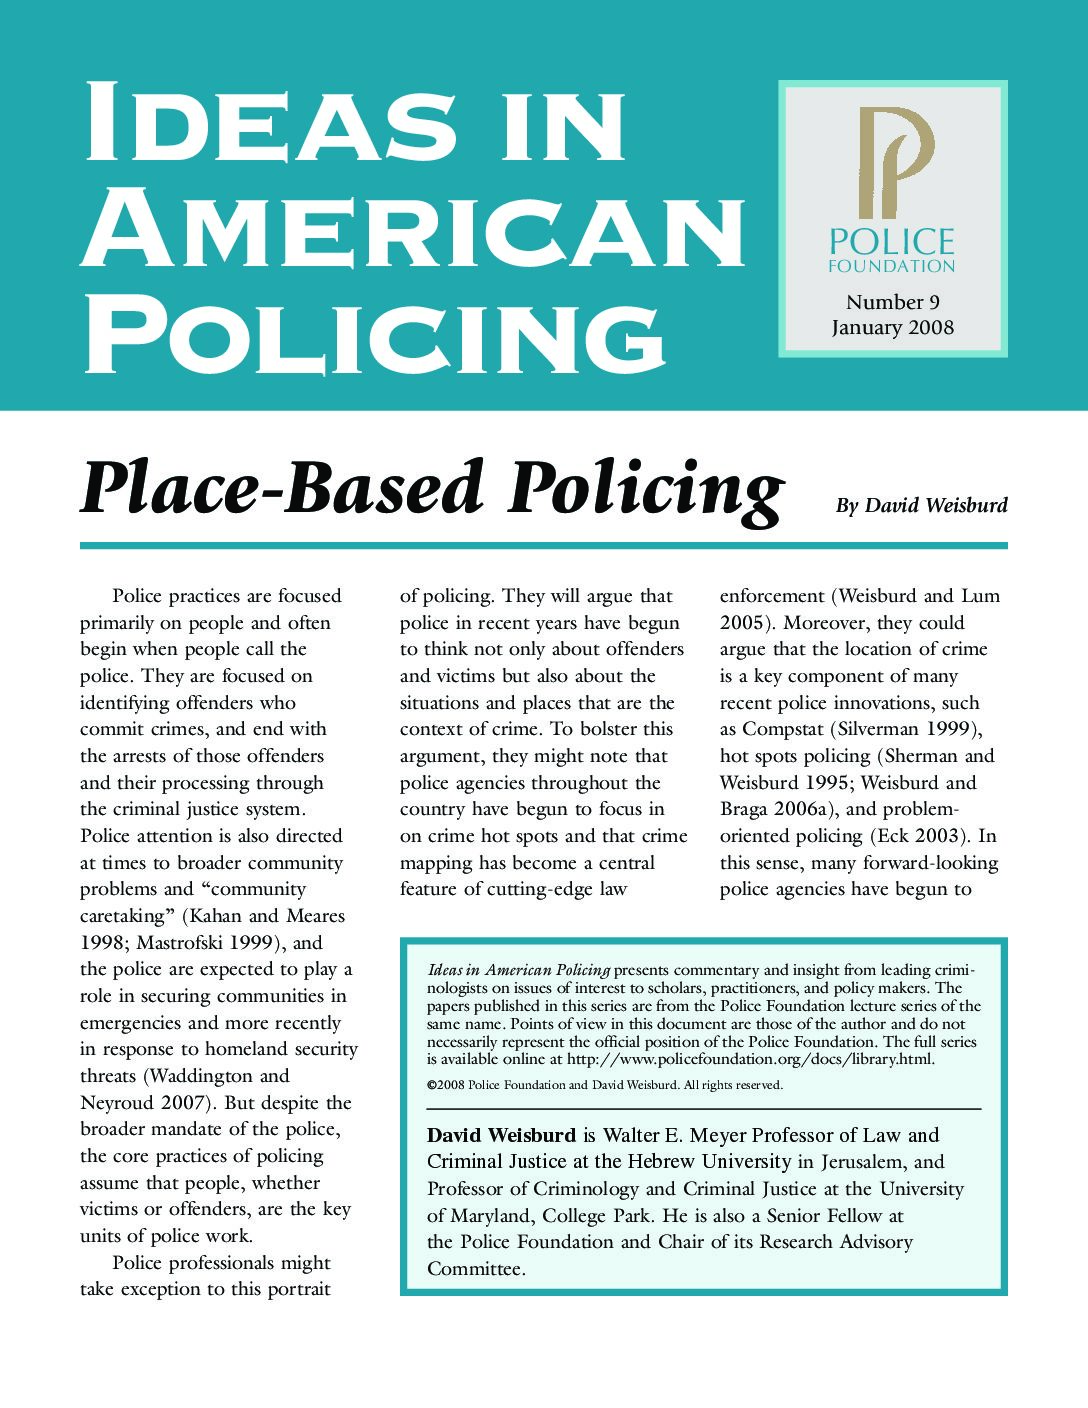 Place-based policing